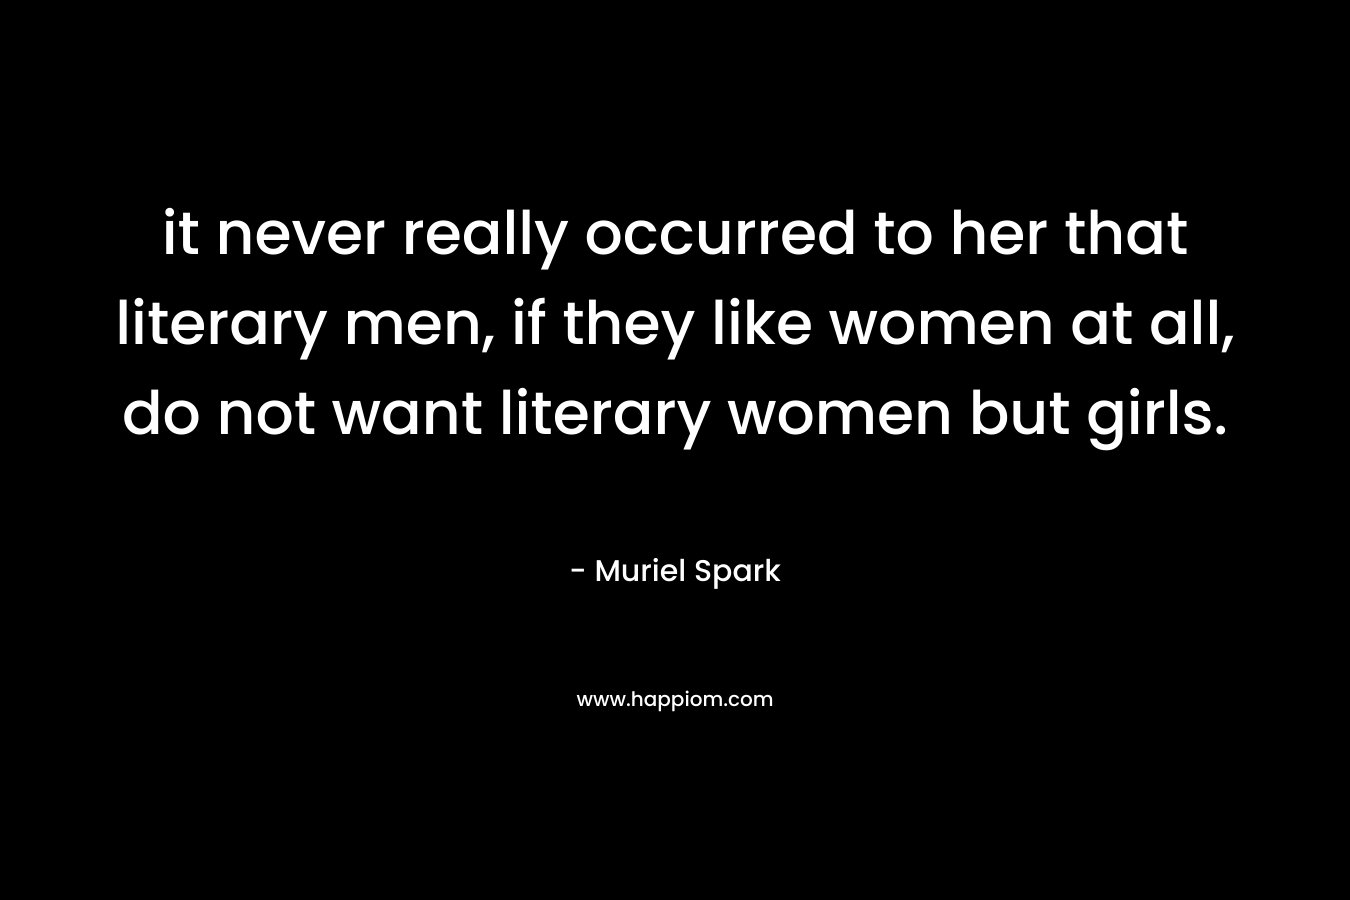 it never really occurred to her that literary men, if they like women at all, do not want literary women but girls.